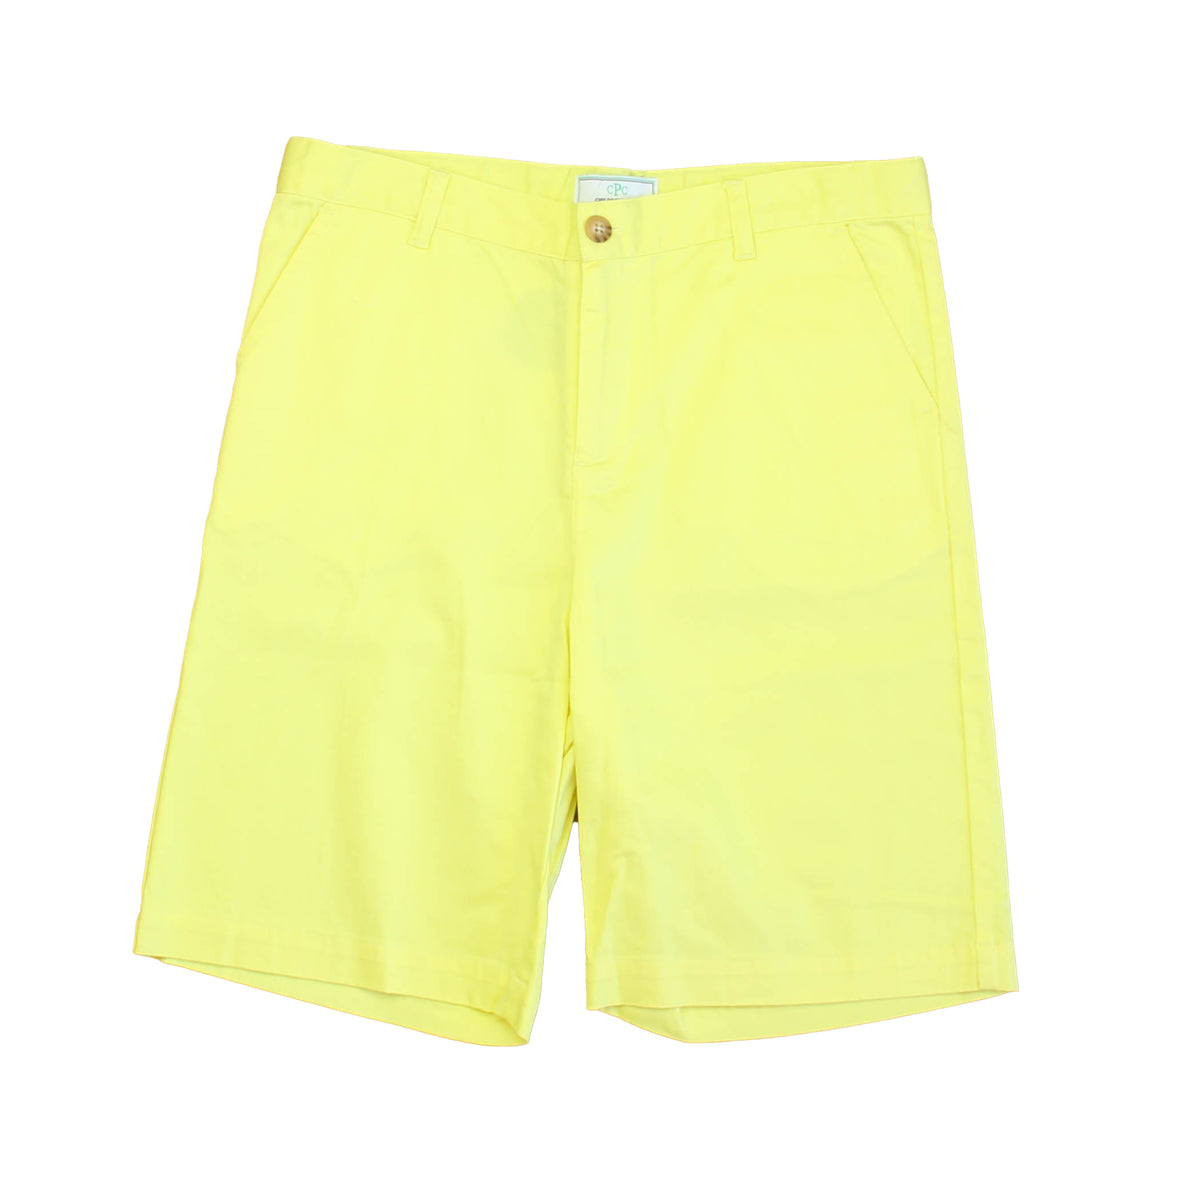 New with Tags: Yellow Shorts -- FINAL SALE